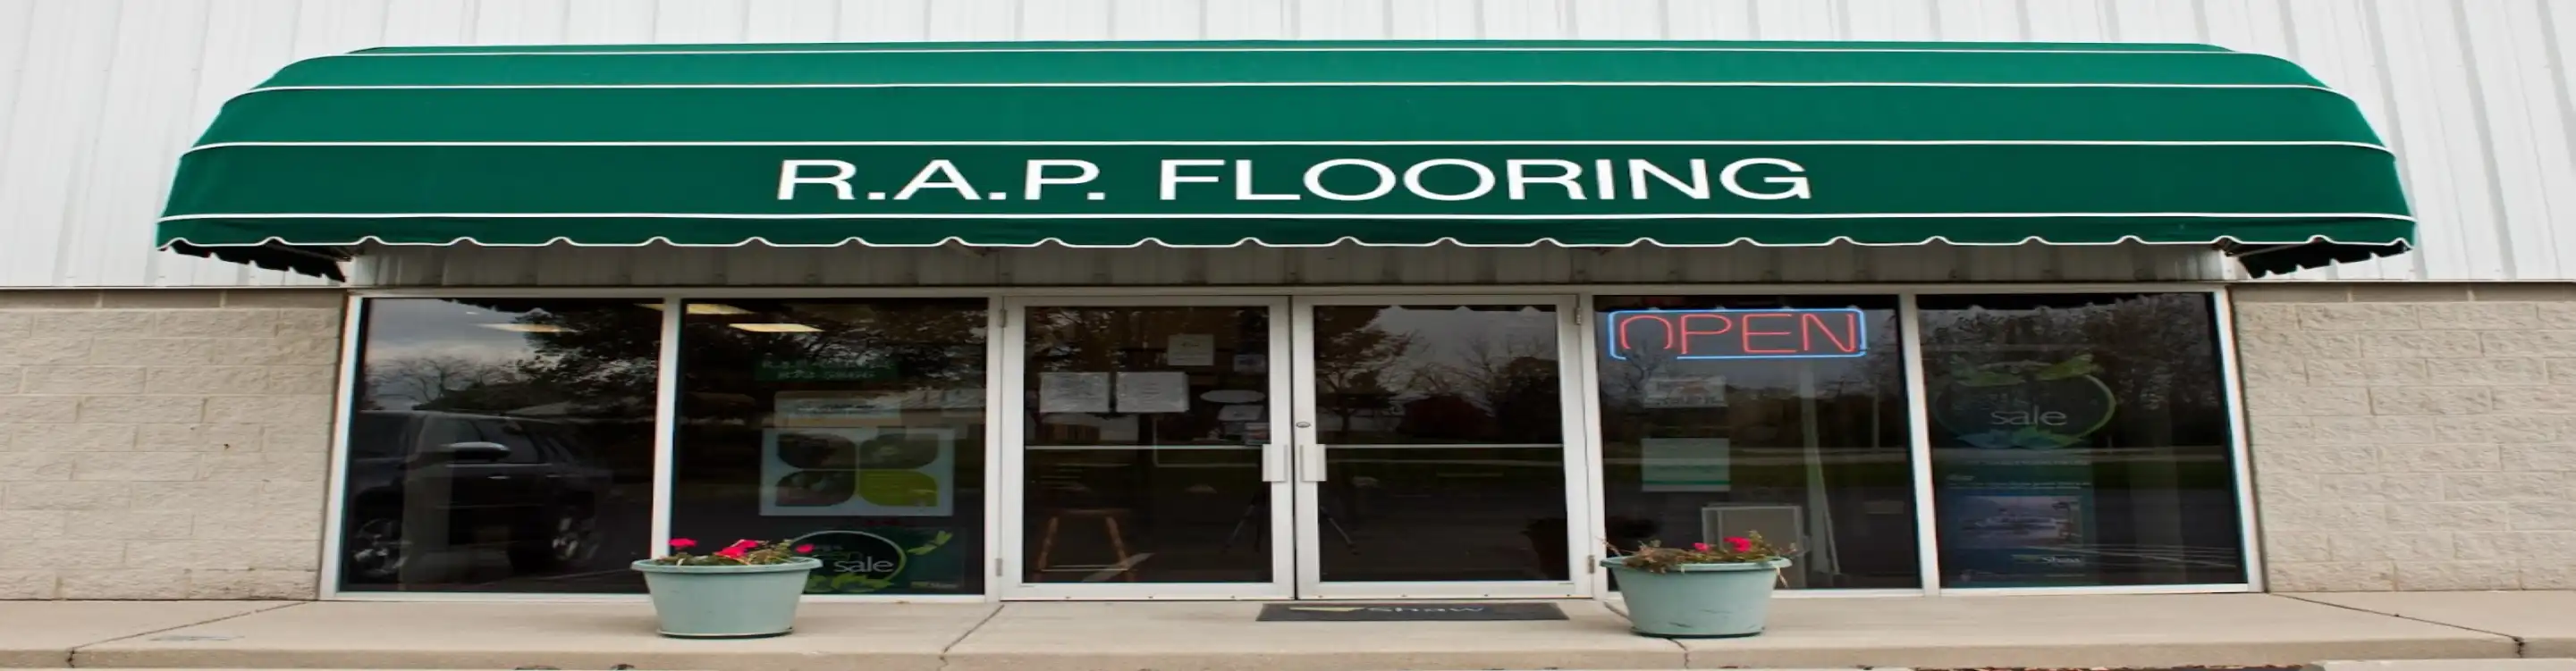 R.A.P storefront